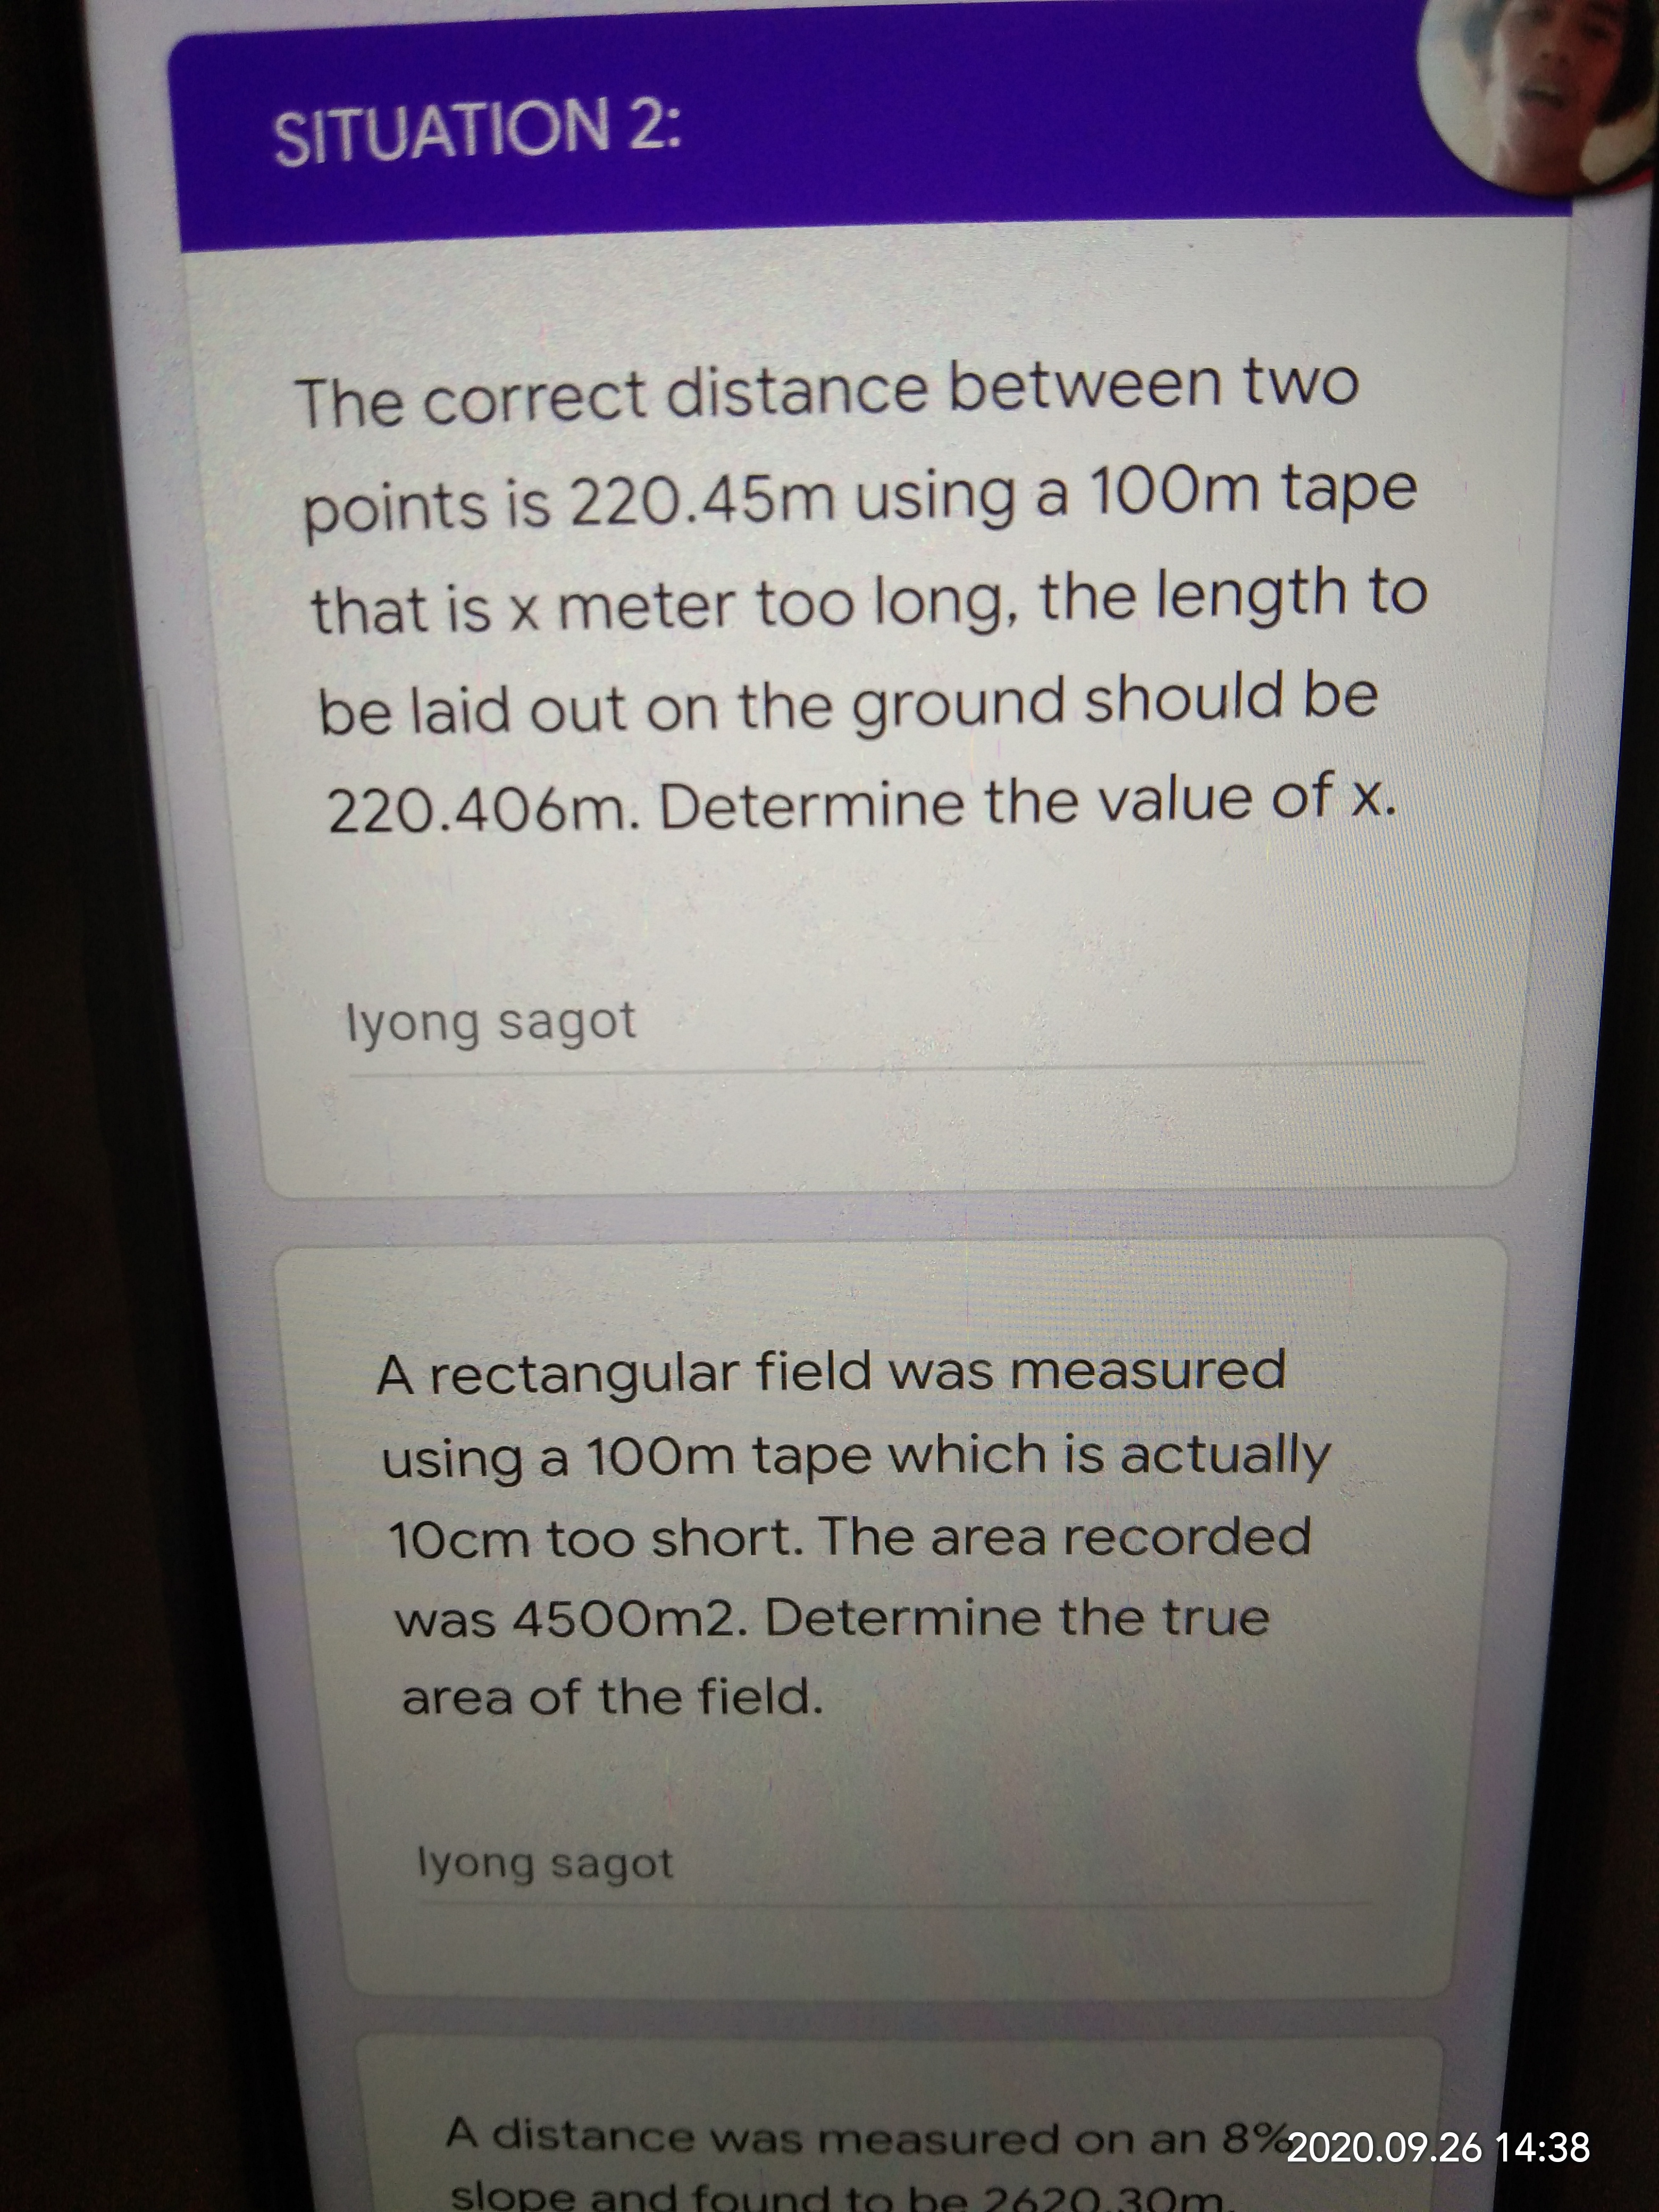 The correct distance between two
points is 220.45m using a 100m tape
that is x meter too long, the length to
be laid out on the ground should be
220.406m. Determine the value of x.
